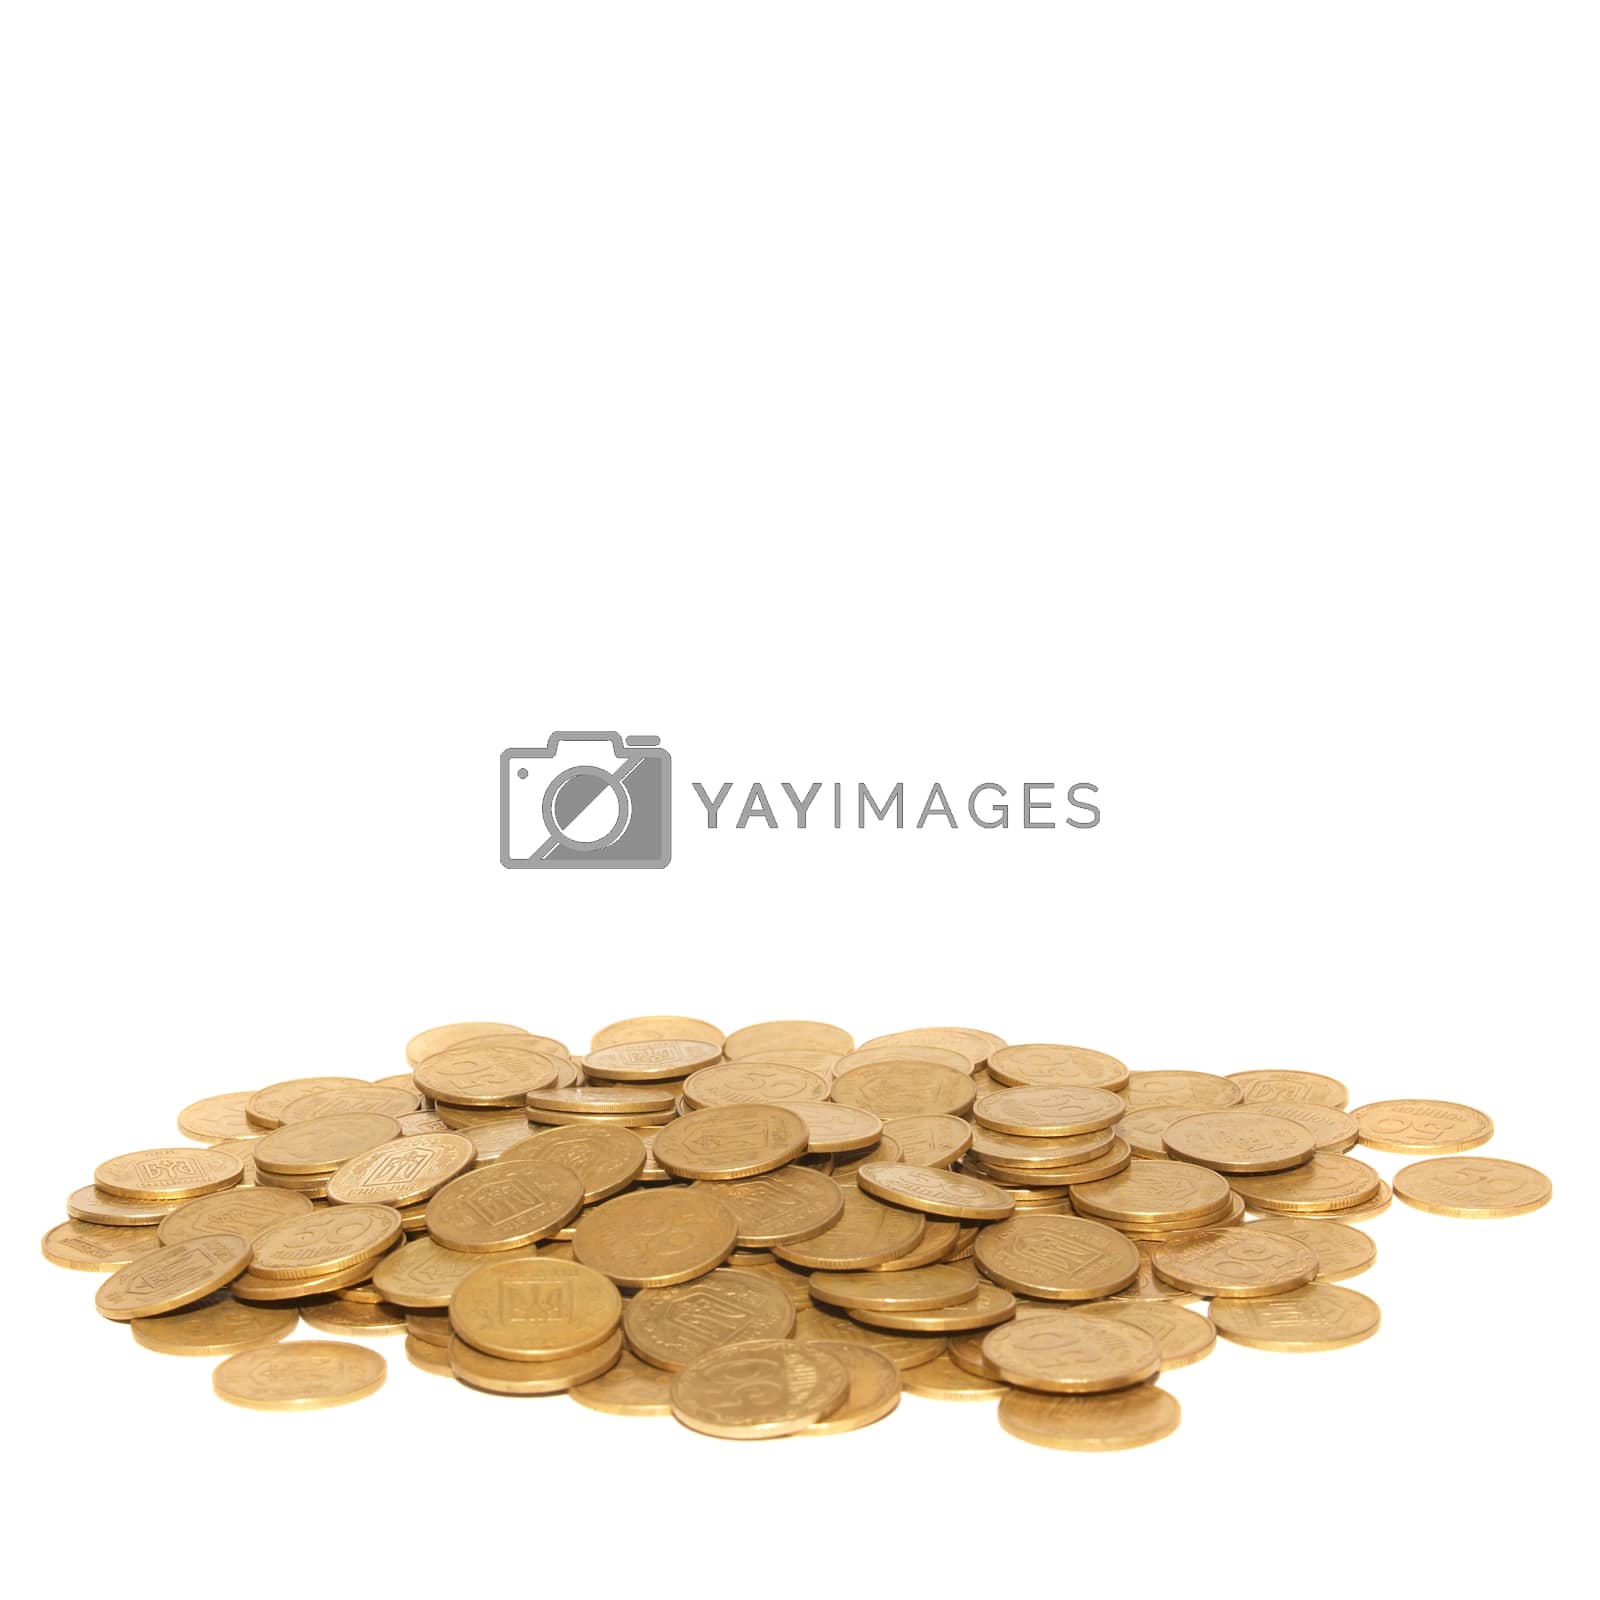 Royalty free image of Stack of golden coins by vapi